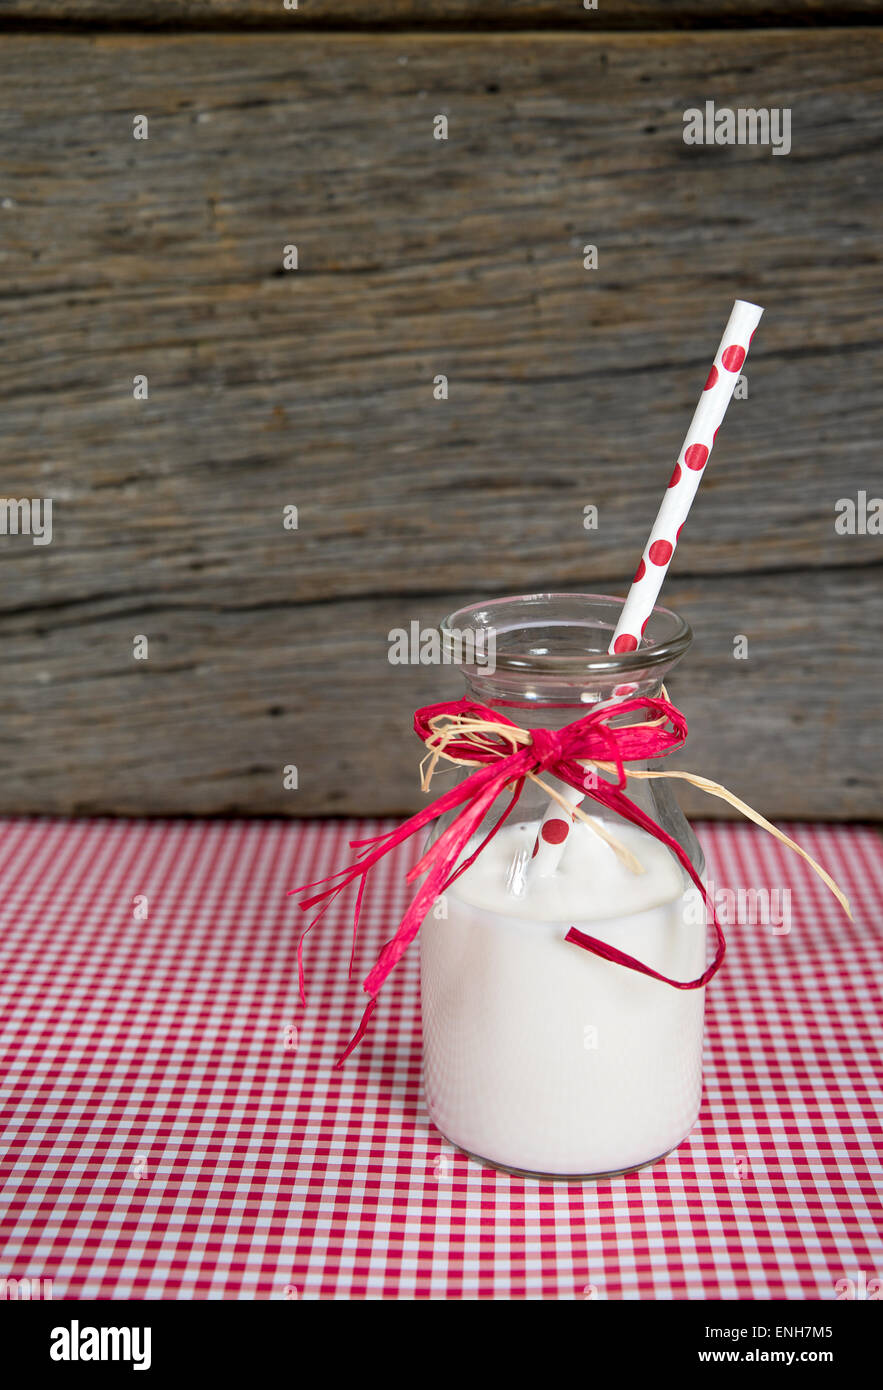 Polka dot straw in white milk with old-fashioned milk bottle and raffia bow on gingham. Stock Photo